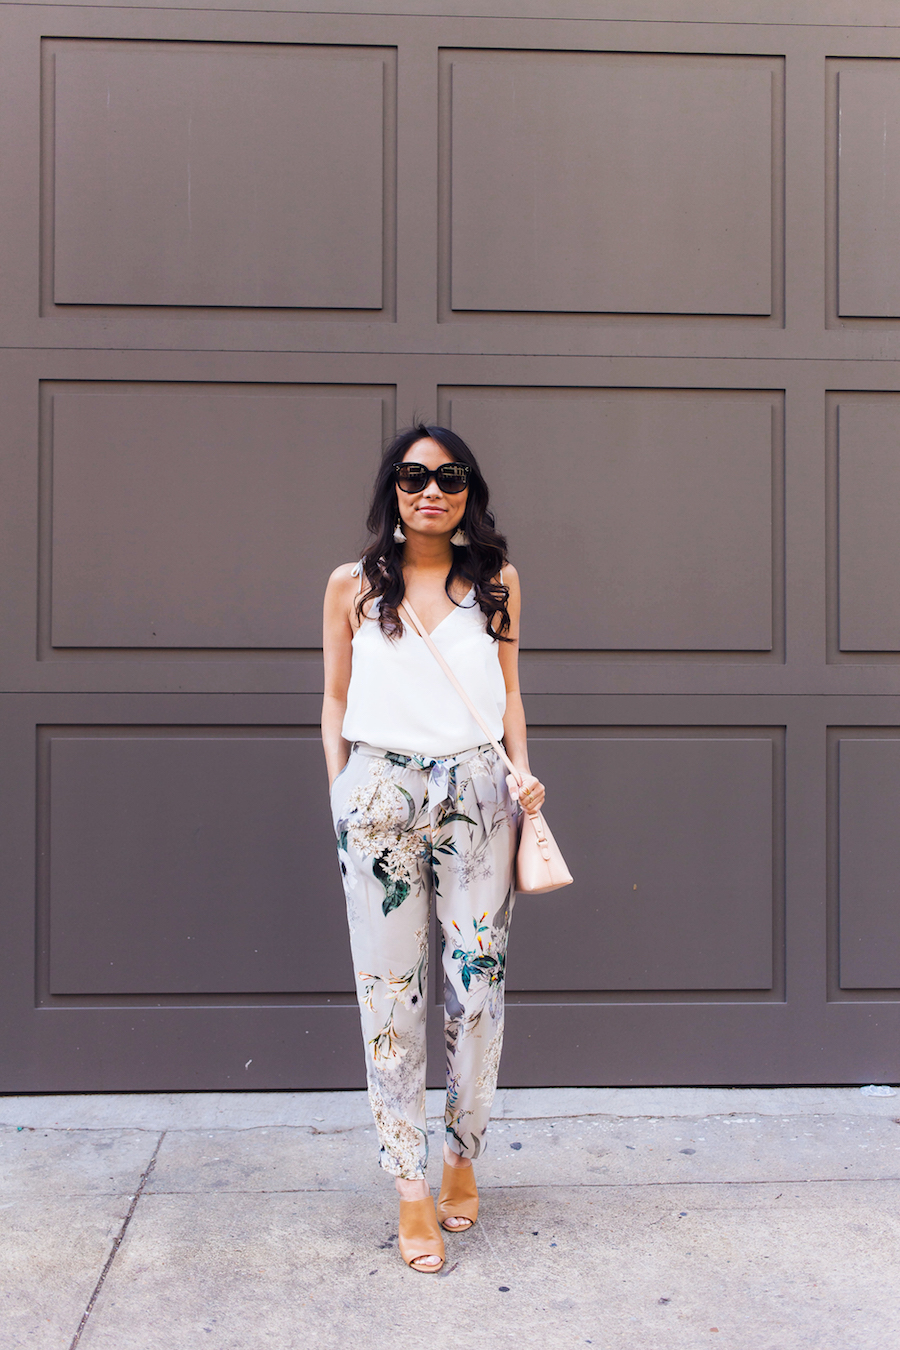 White Wide Leg Pants with Floral Blouse Outfits (2 ideas & outfits)